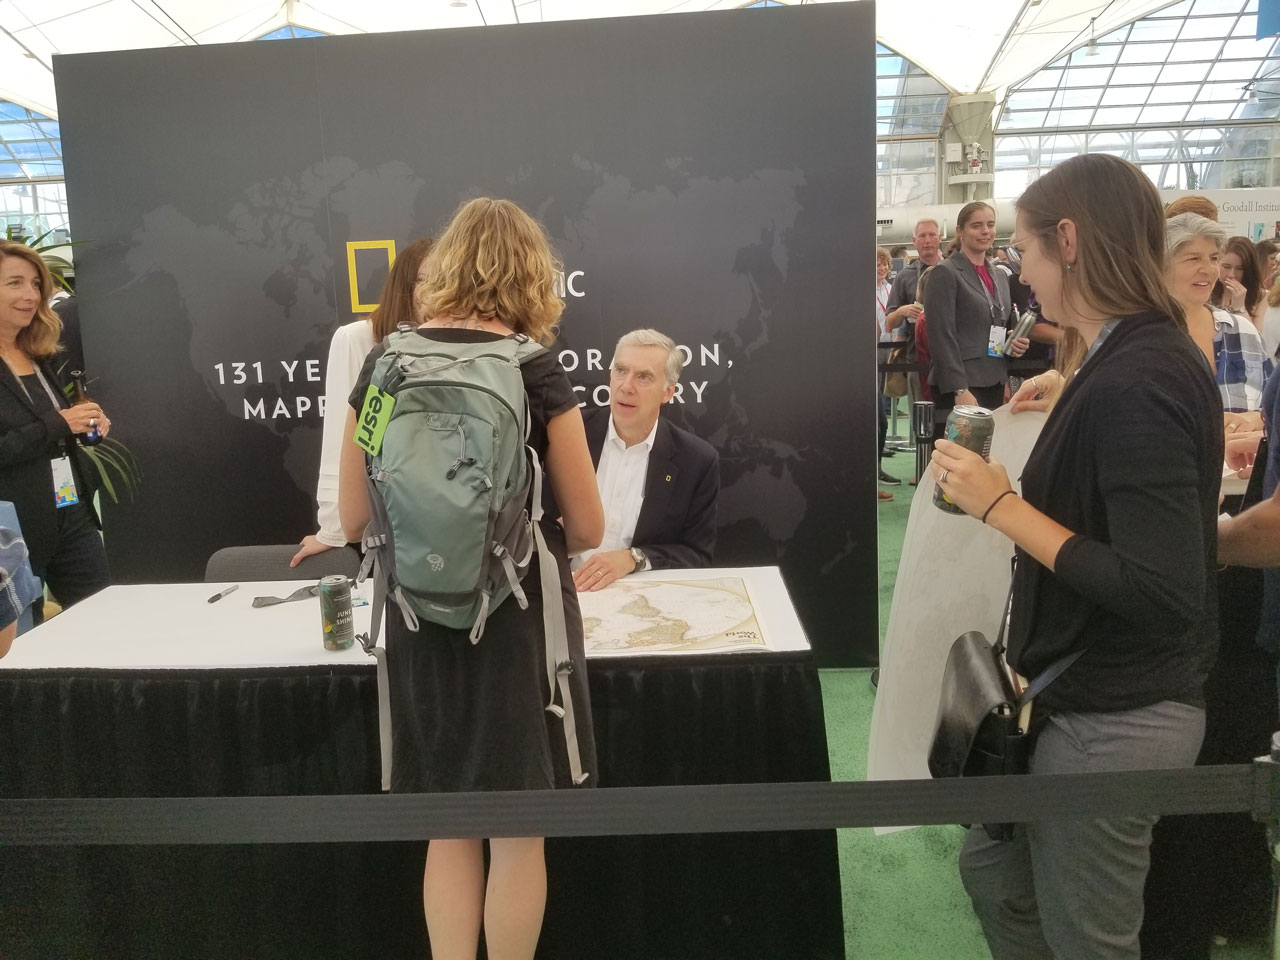 Tracy R. Wolstencraft of the National Geographic Society was at the National Geographic booth signing posters.